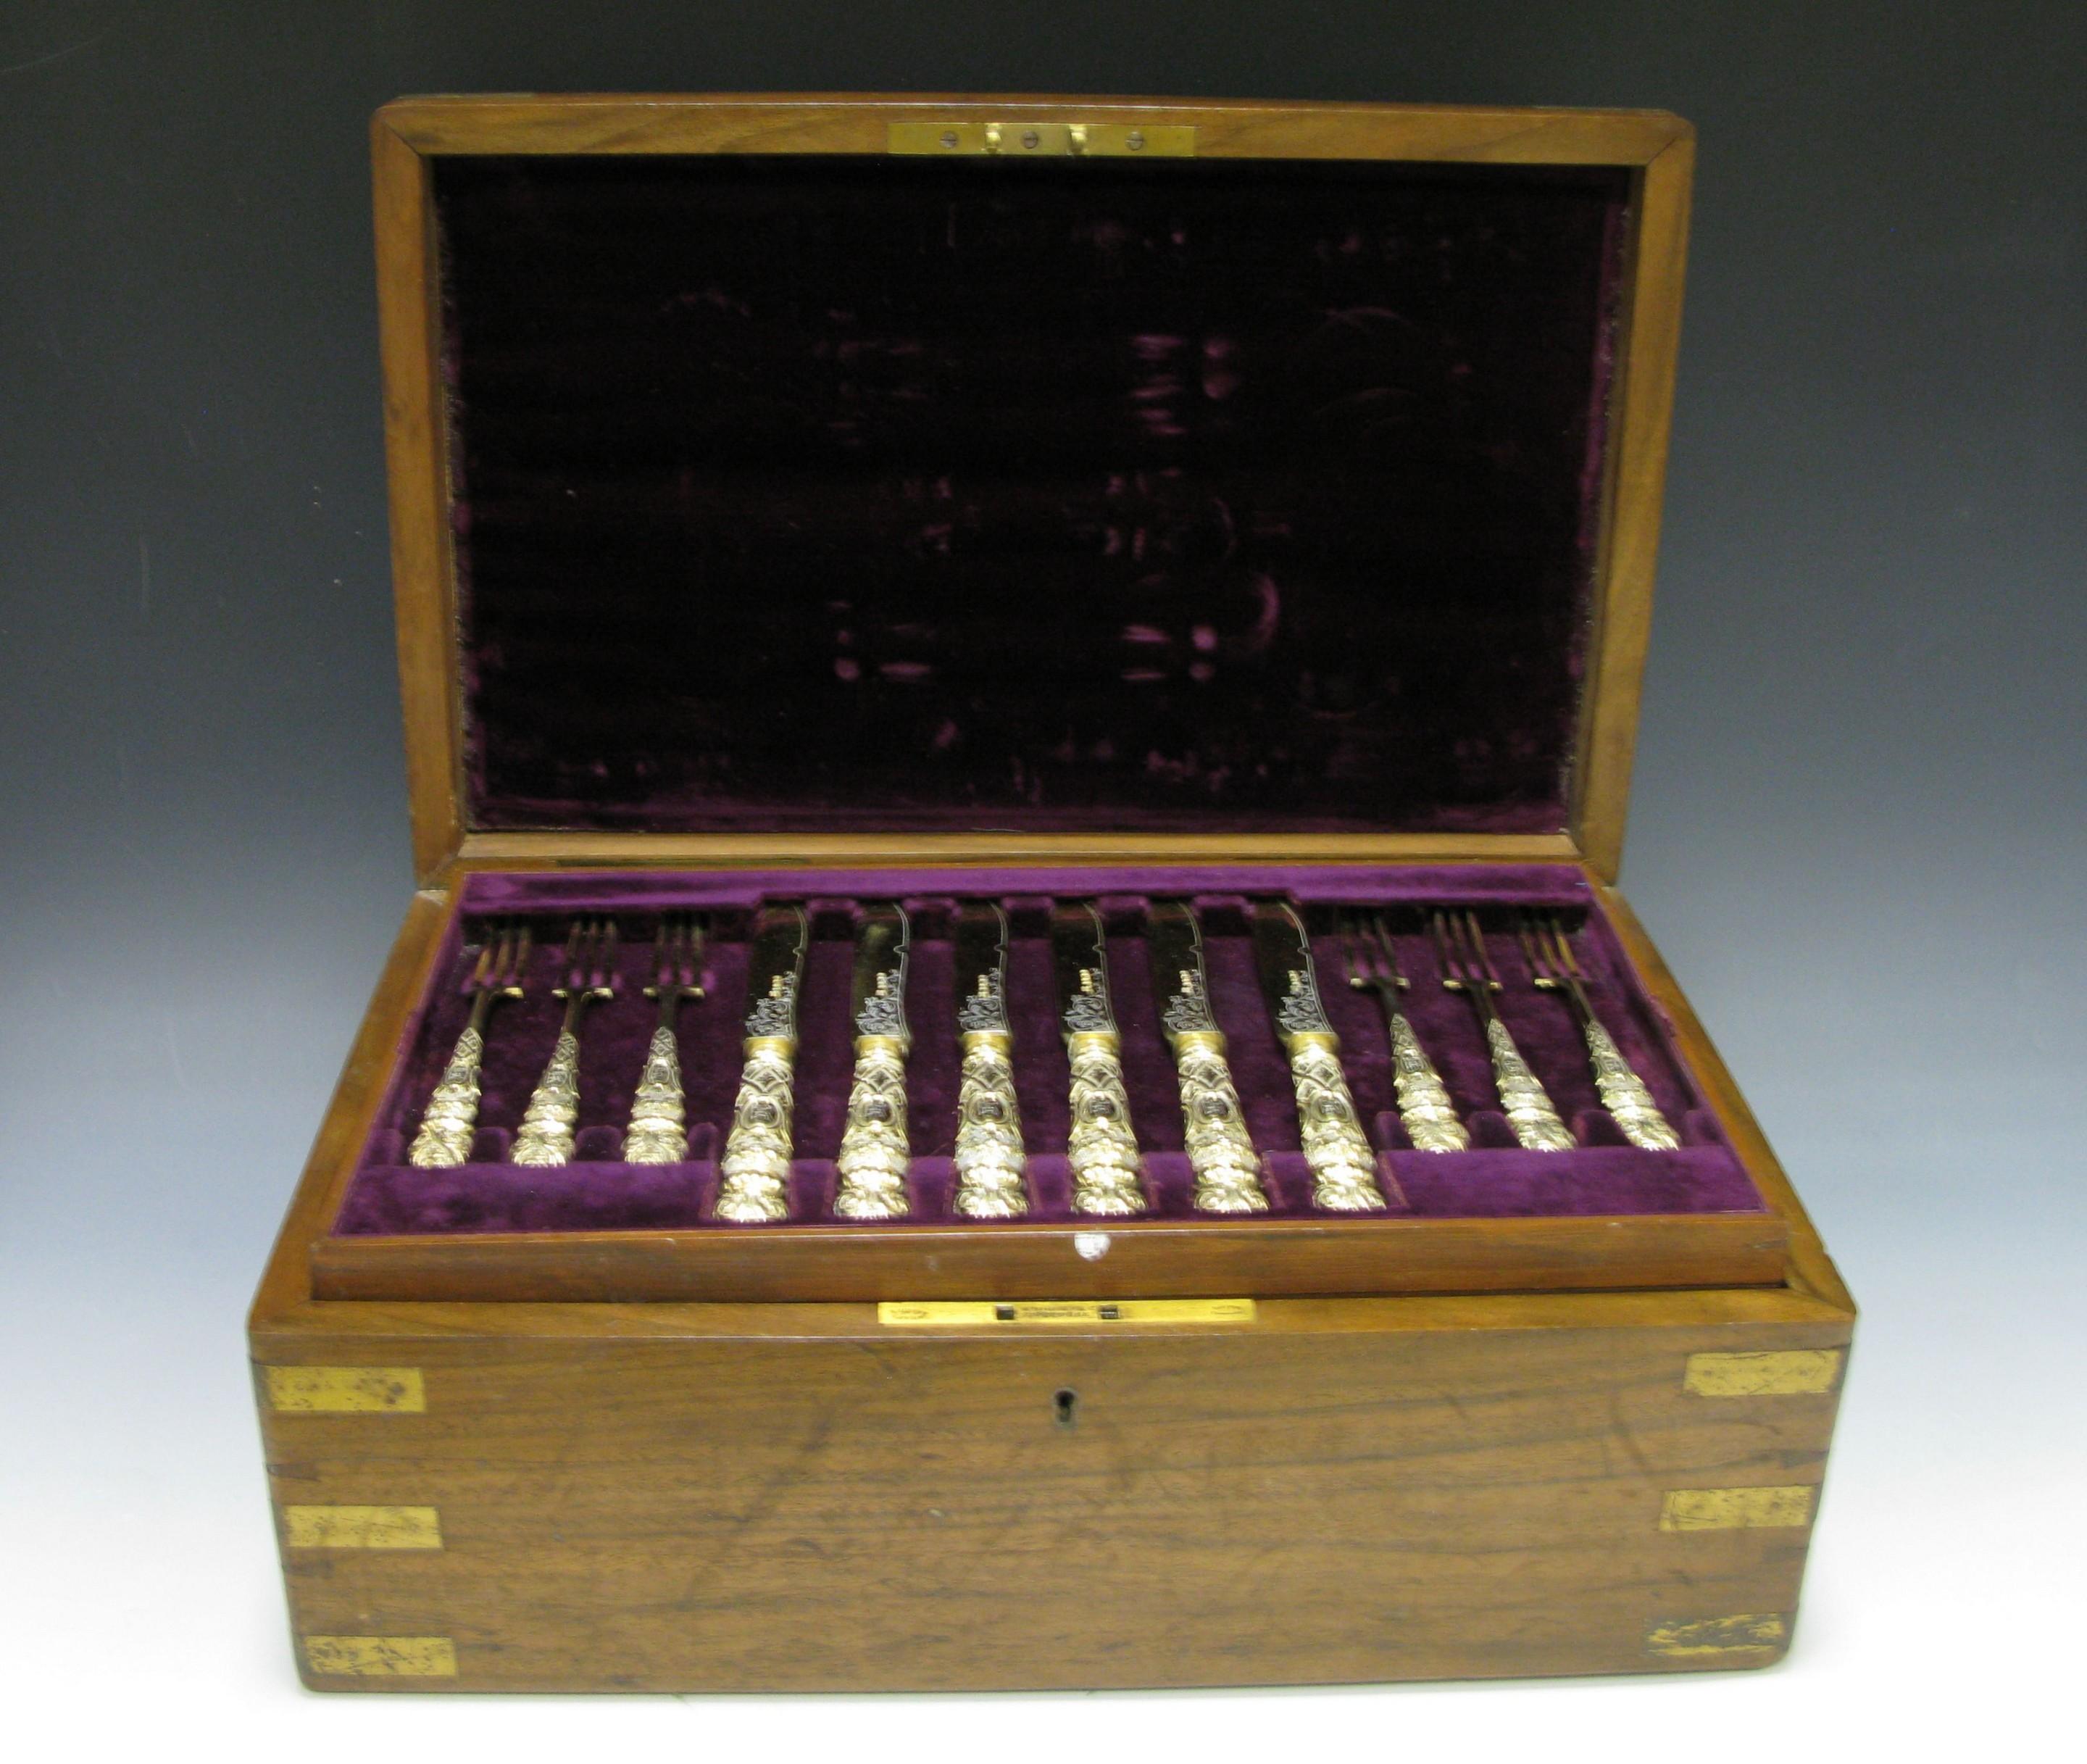 A magnificent antique silver gilt dessert service made by Richard Martin and Ebenezer Hall all contained in the original fitted box. The service has shaped stems and mitre terminals stamped with scrolls, foliage and strap work on a matted ground,